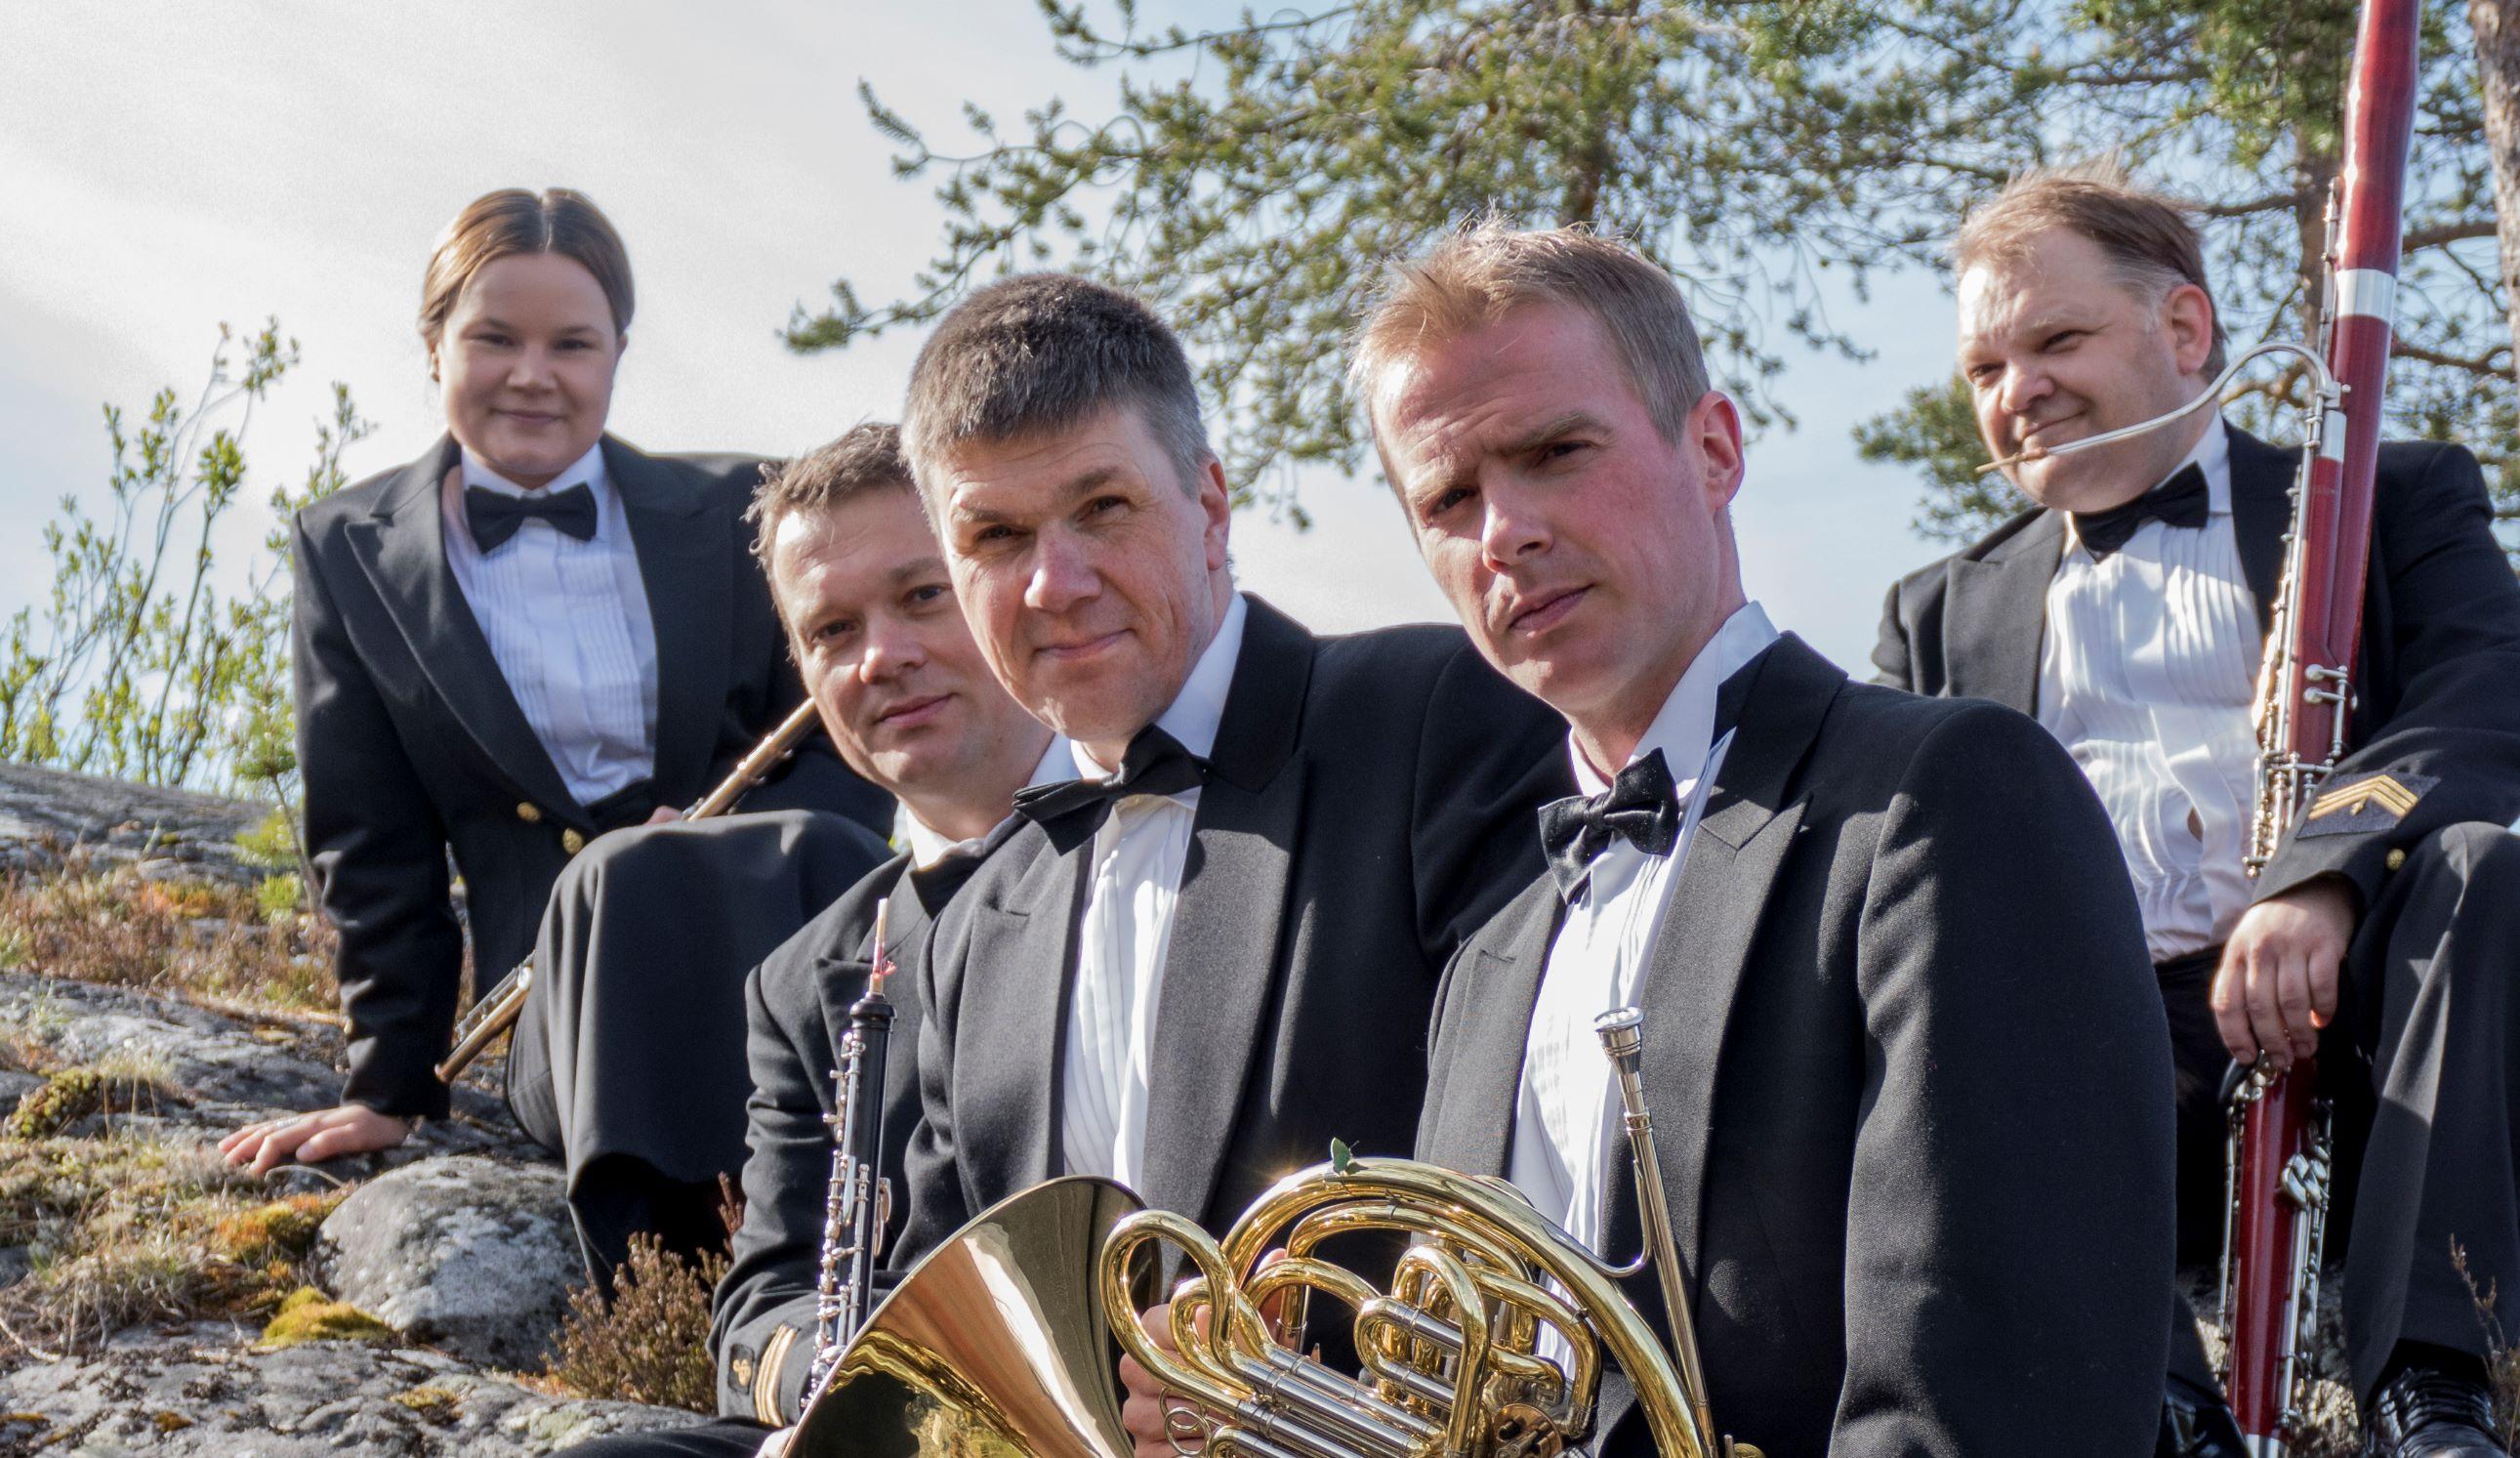 Wind Quintet in a group photo